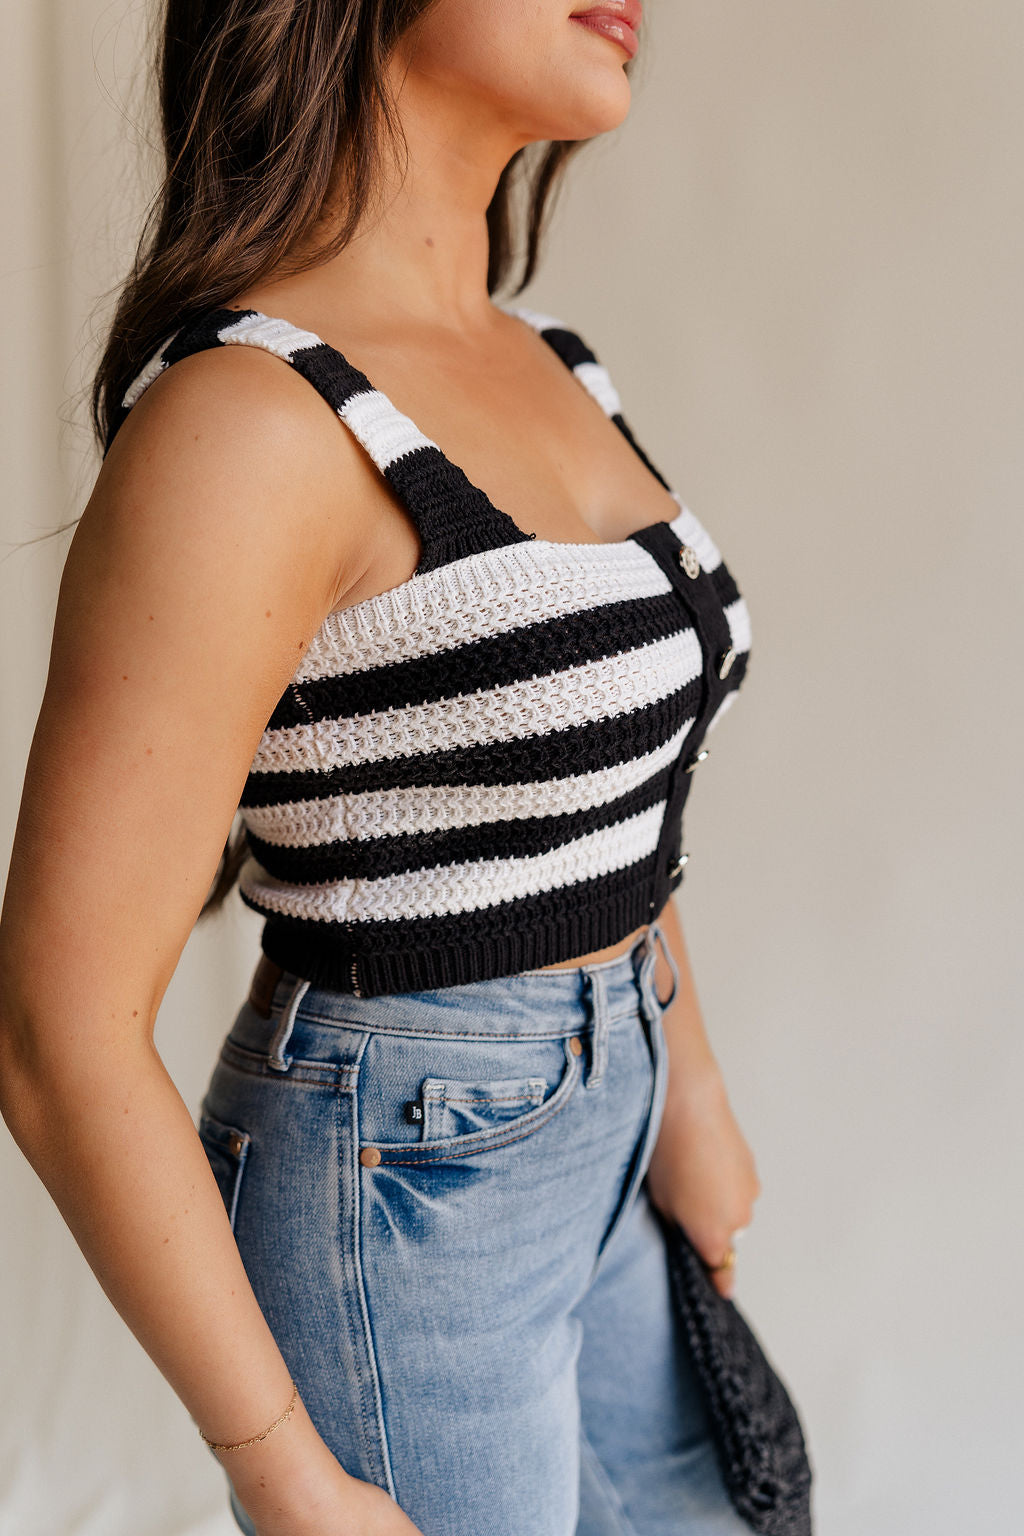 side view of female model wearing the Kai Black & White Stripe Knit Tank which features Black and White Crochet Knit, Stripe Pattern, Cropped Waist, Rhinestone Button Up, Square Neckline and Sleeveless